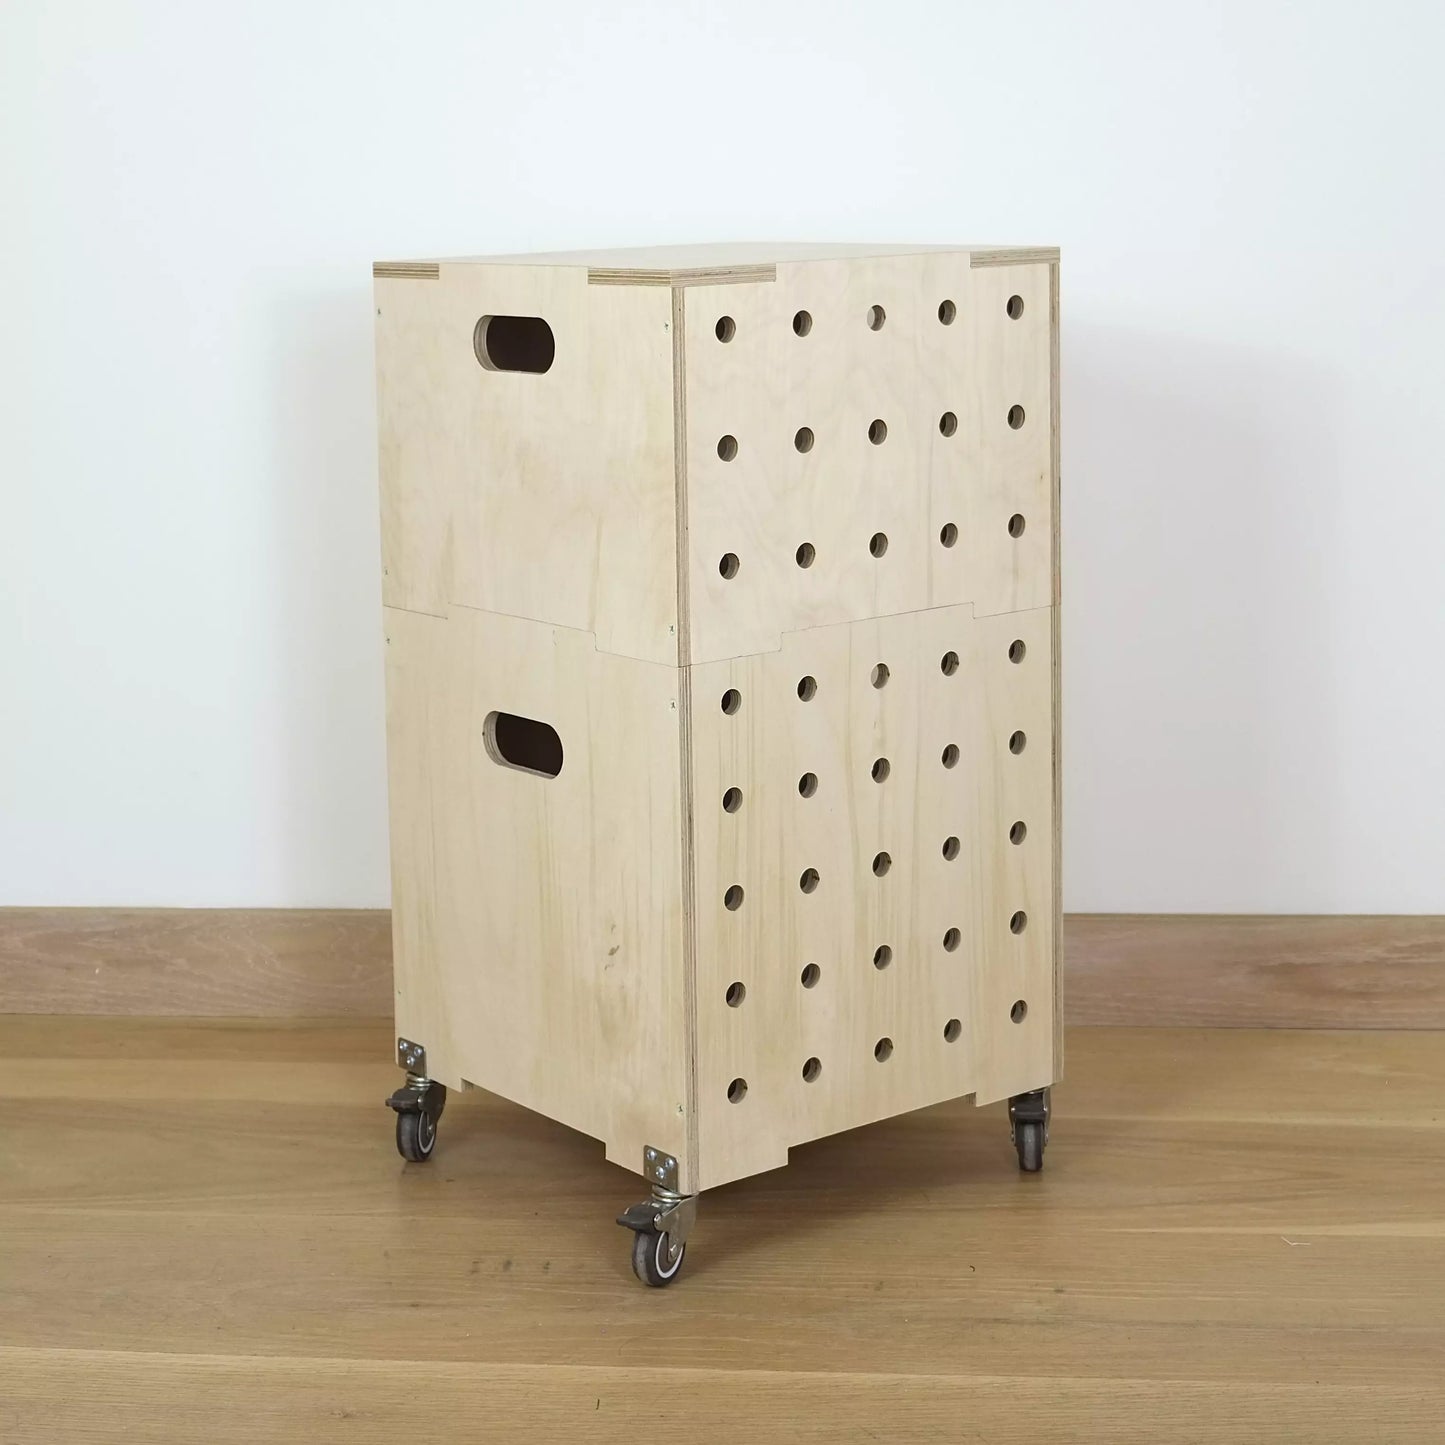 Stack of two simple pale wooden square shaped storage crates facing diagonally to right, with eight rows of holes cut in front facet, castors and a wooden lid, sitting on a wooden floor.